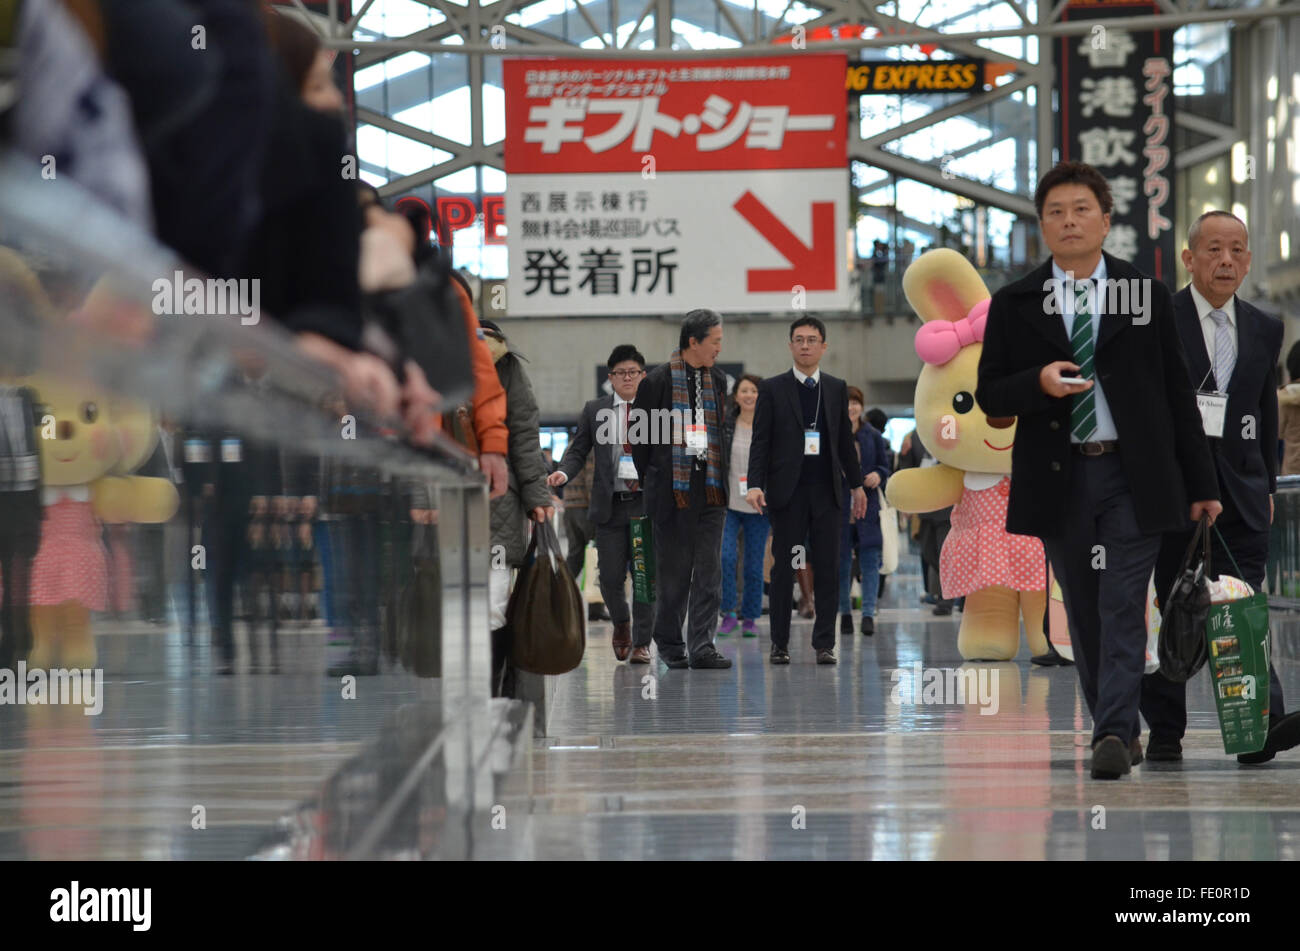 Tokyo, Japan. 3rd Feb, 2016. Attendees walk on the hallways of the Tokyo Big Site East building during the 81st Tokyo International Gift Show Spring 2016. The show offers a collection of the latest smart phone goods, stationary, hobby material goods, exhibits of personal gifts, consumer goods and decorative accessories. The show also includes a new product contest in which more than 400 new products enter to compite. Also a collection of unique products from all over the world to compete in the most popular imported product contest. Kitchen and dining room goods contest. Established in 1976, Stock Photo